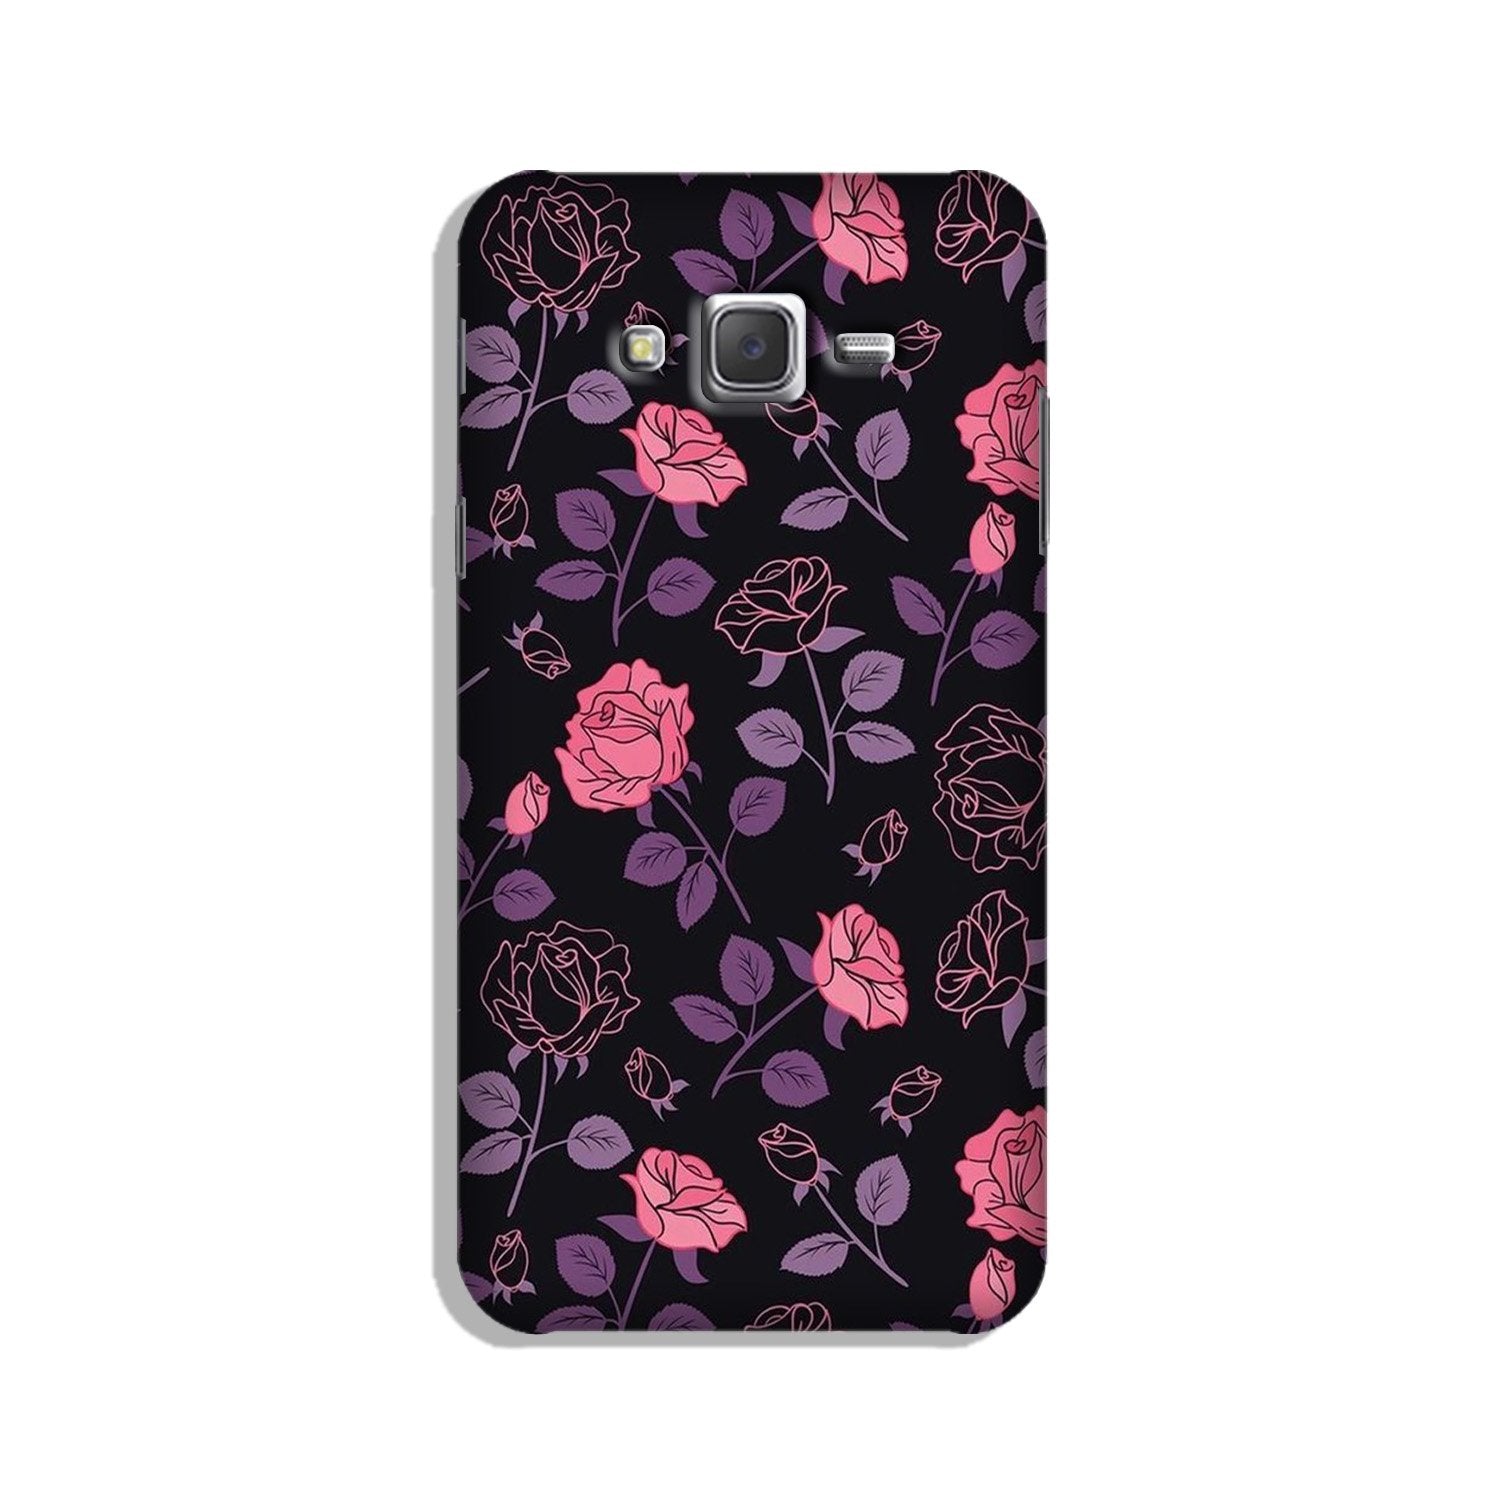 Rose Black Background Case for Galaxy J7 Nxt